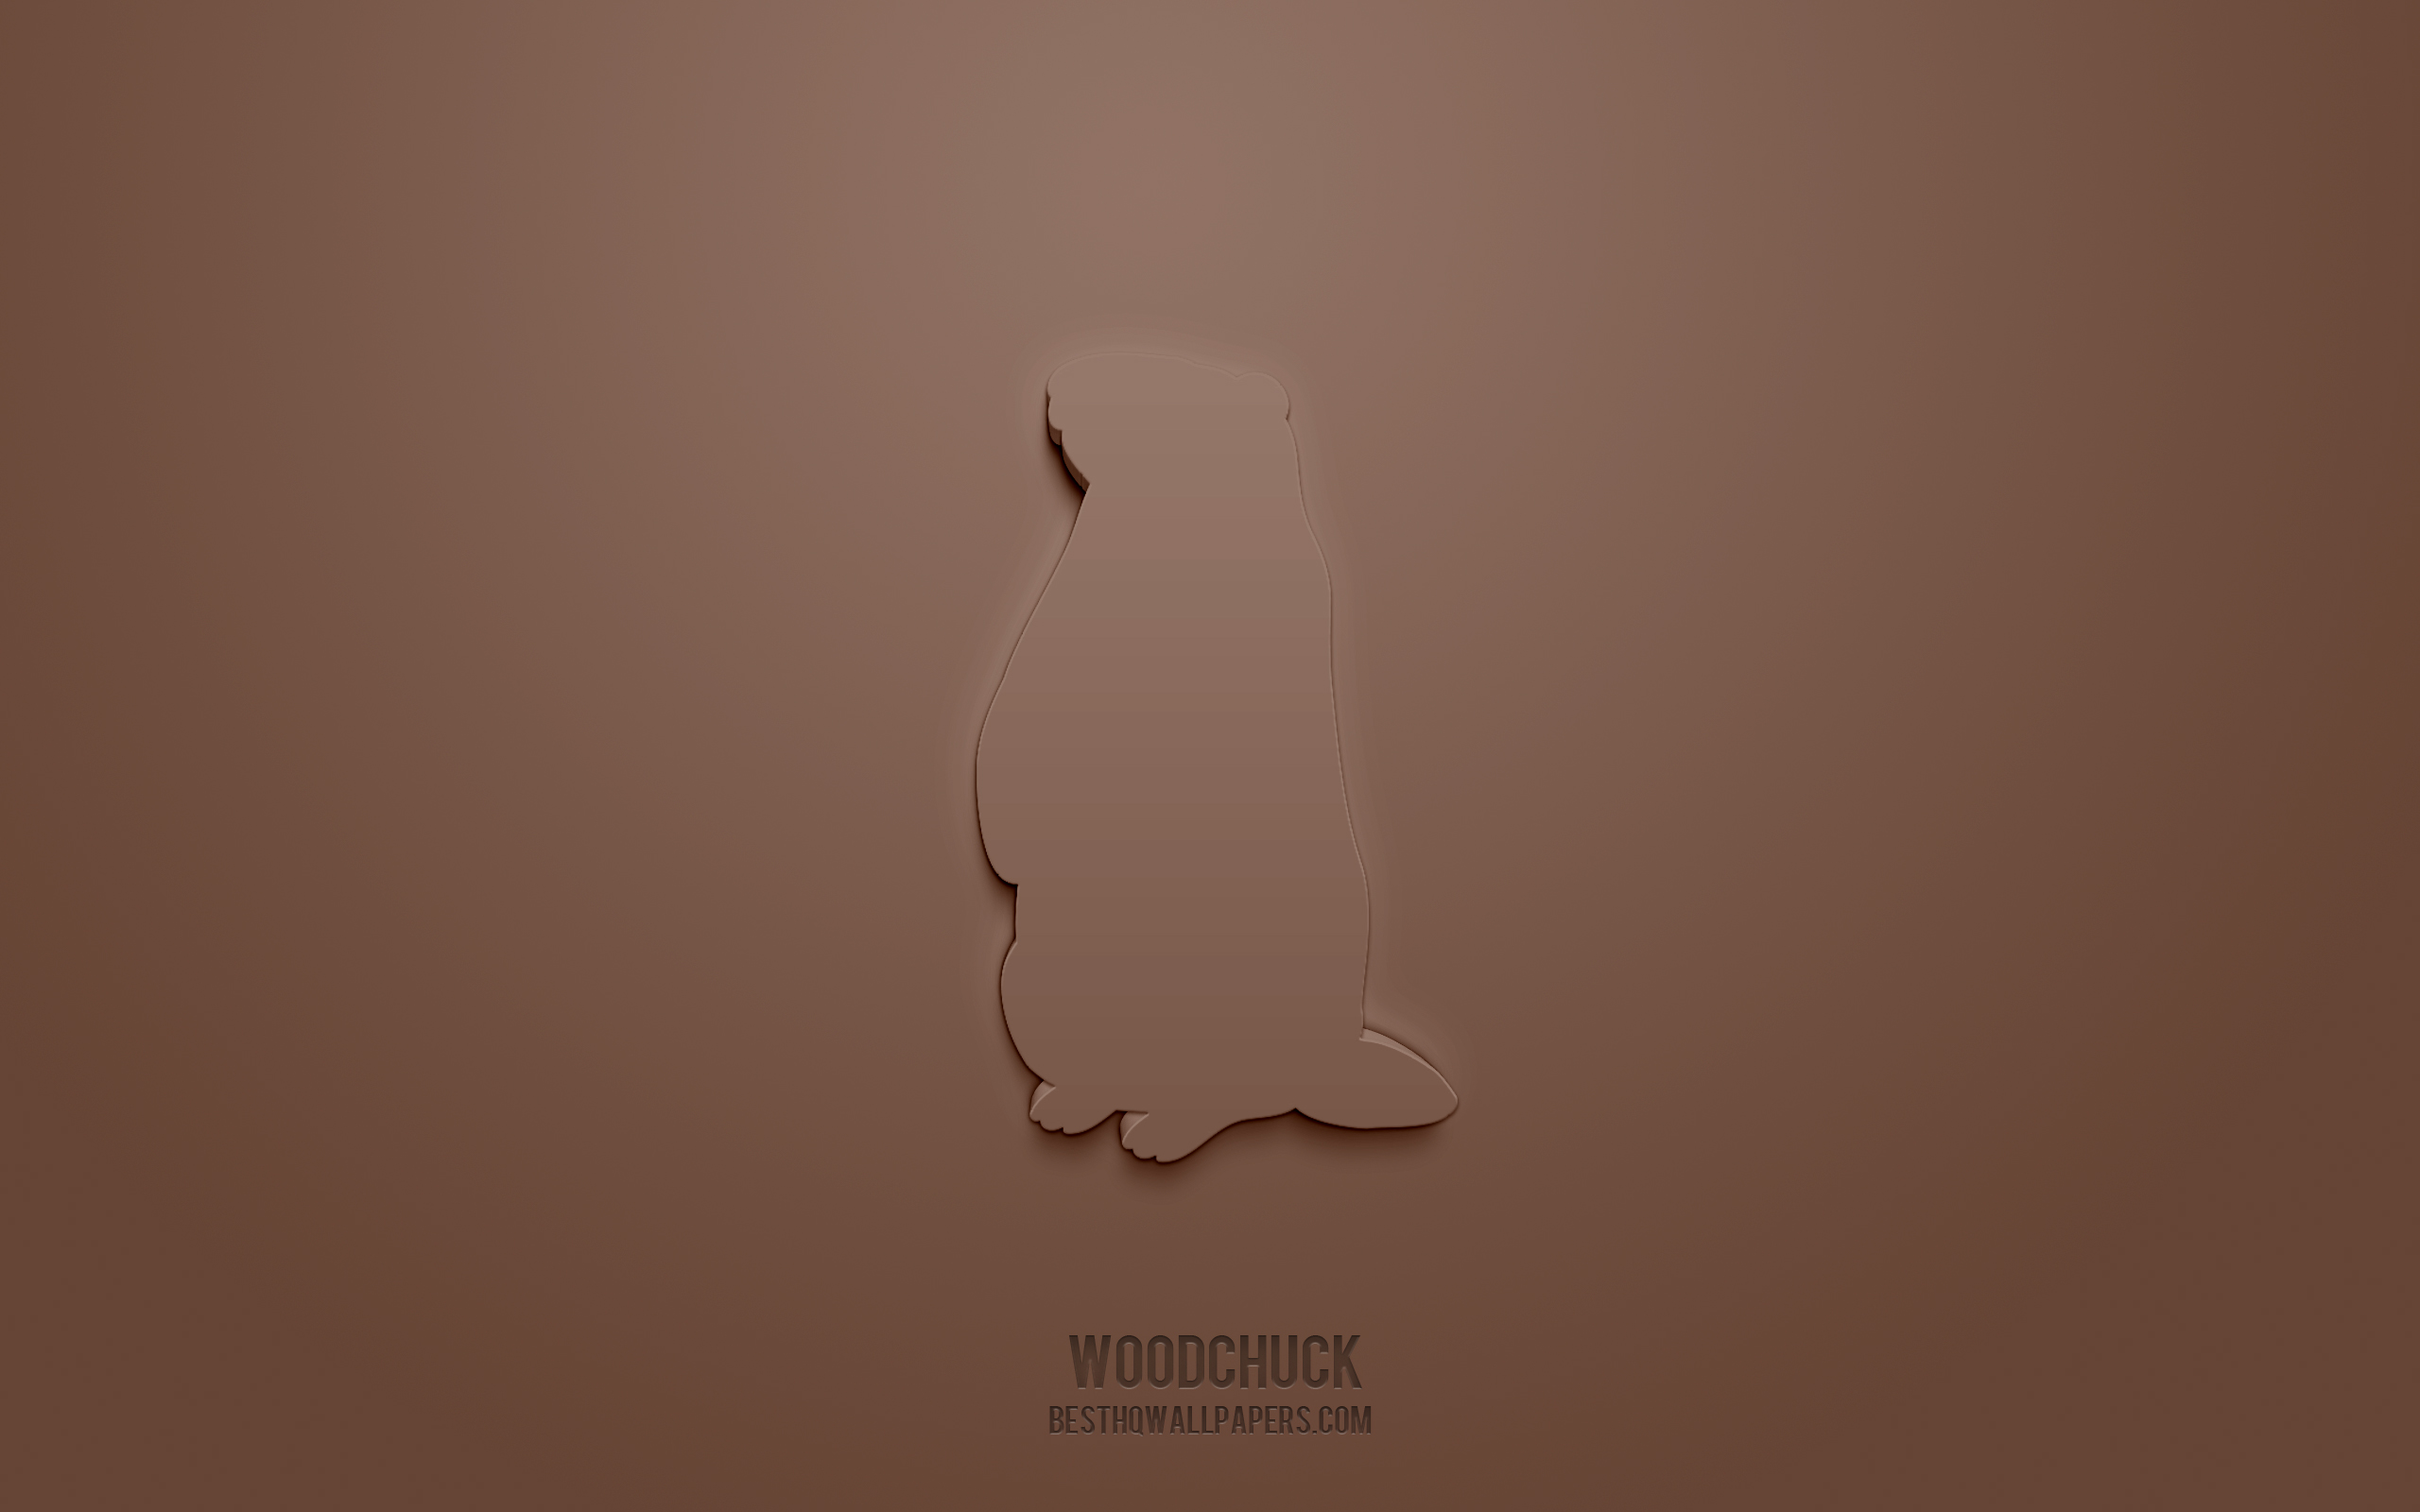 Download wallpaper Woodchuck 3D icon, brown background, 3D symbols, Woodchuck, Animals icons, 3D icons, Woodchuck sign, Animals 3D icons for desktop with resolution 2560x1600. High Quality HD picture wallpaper